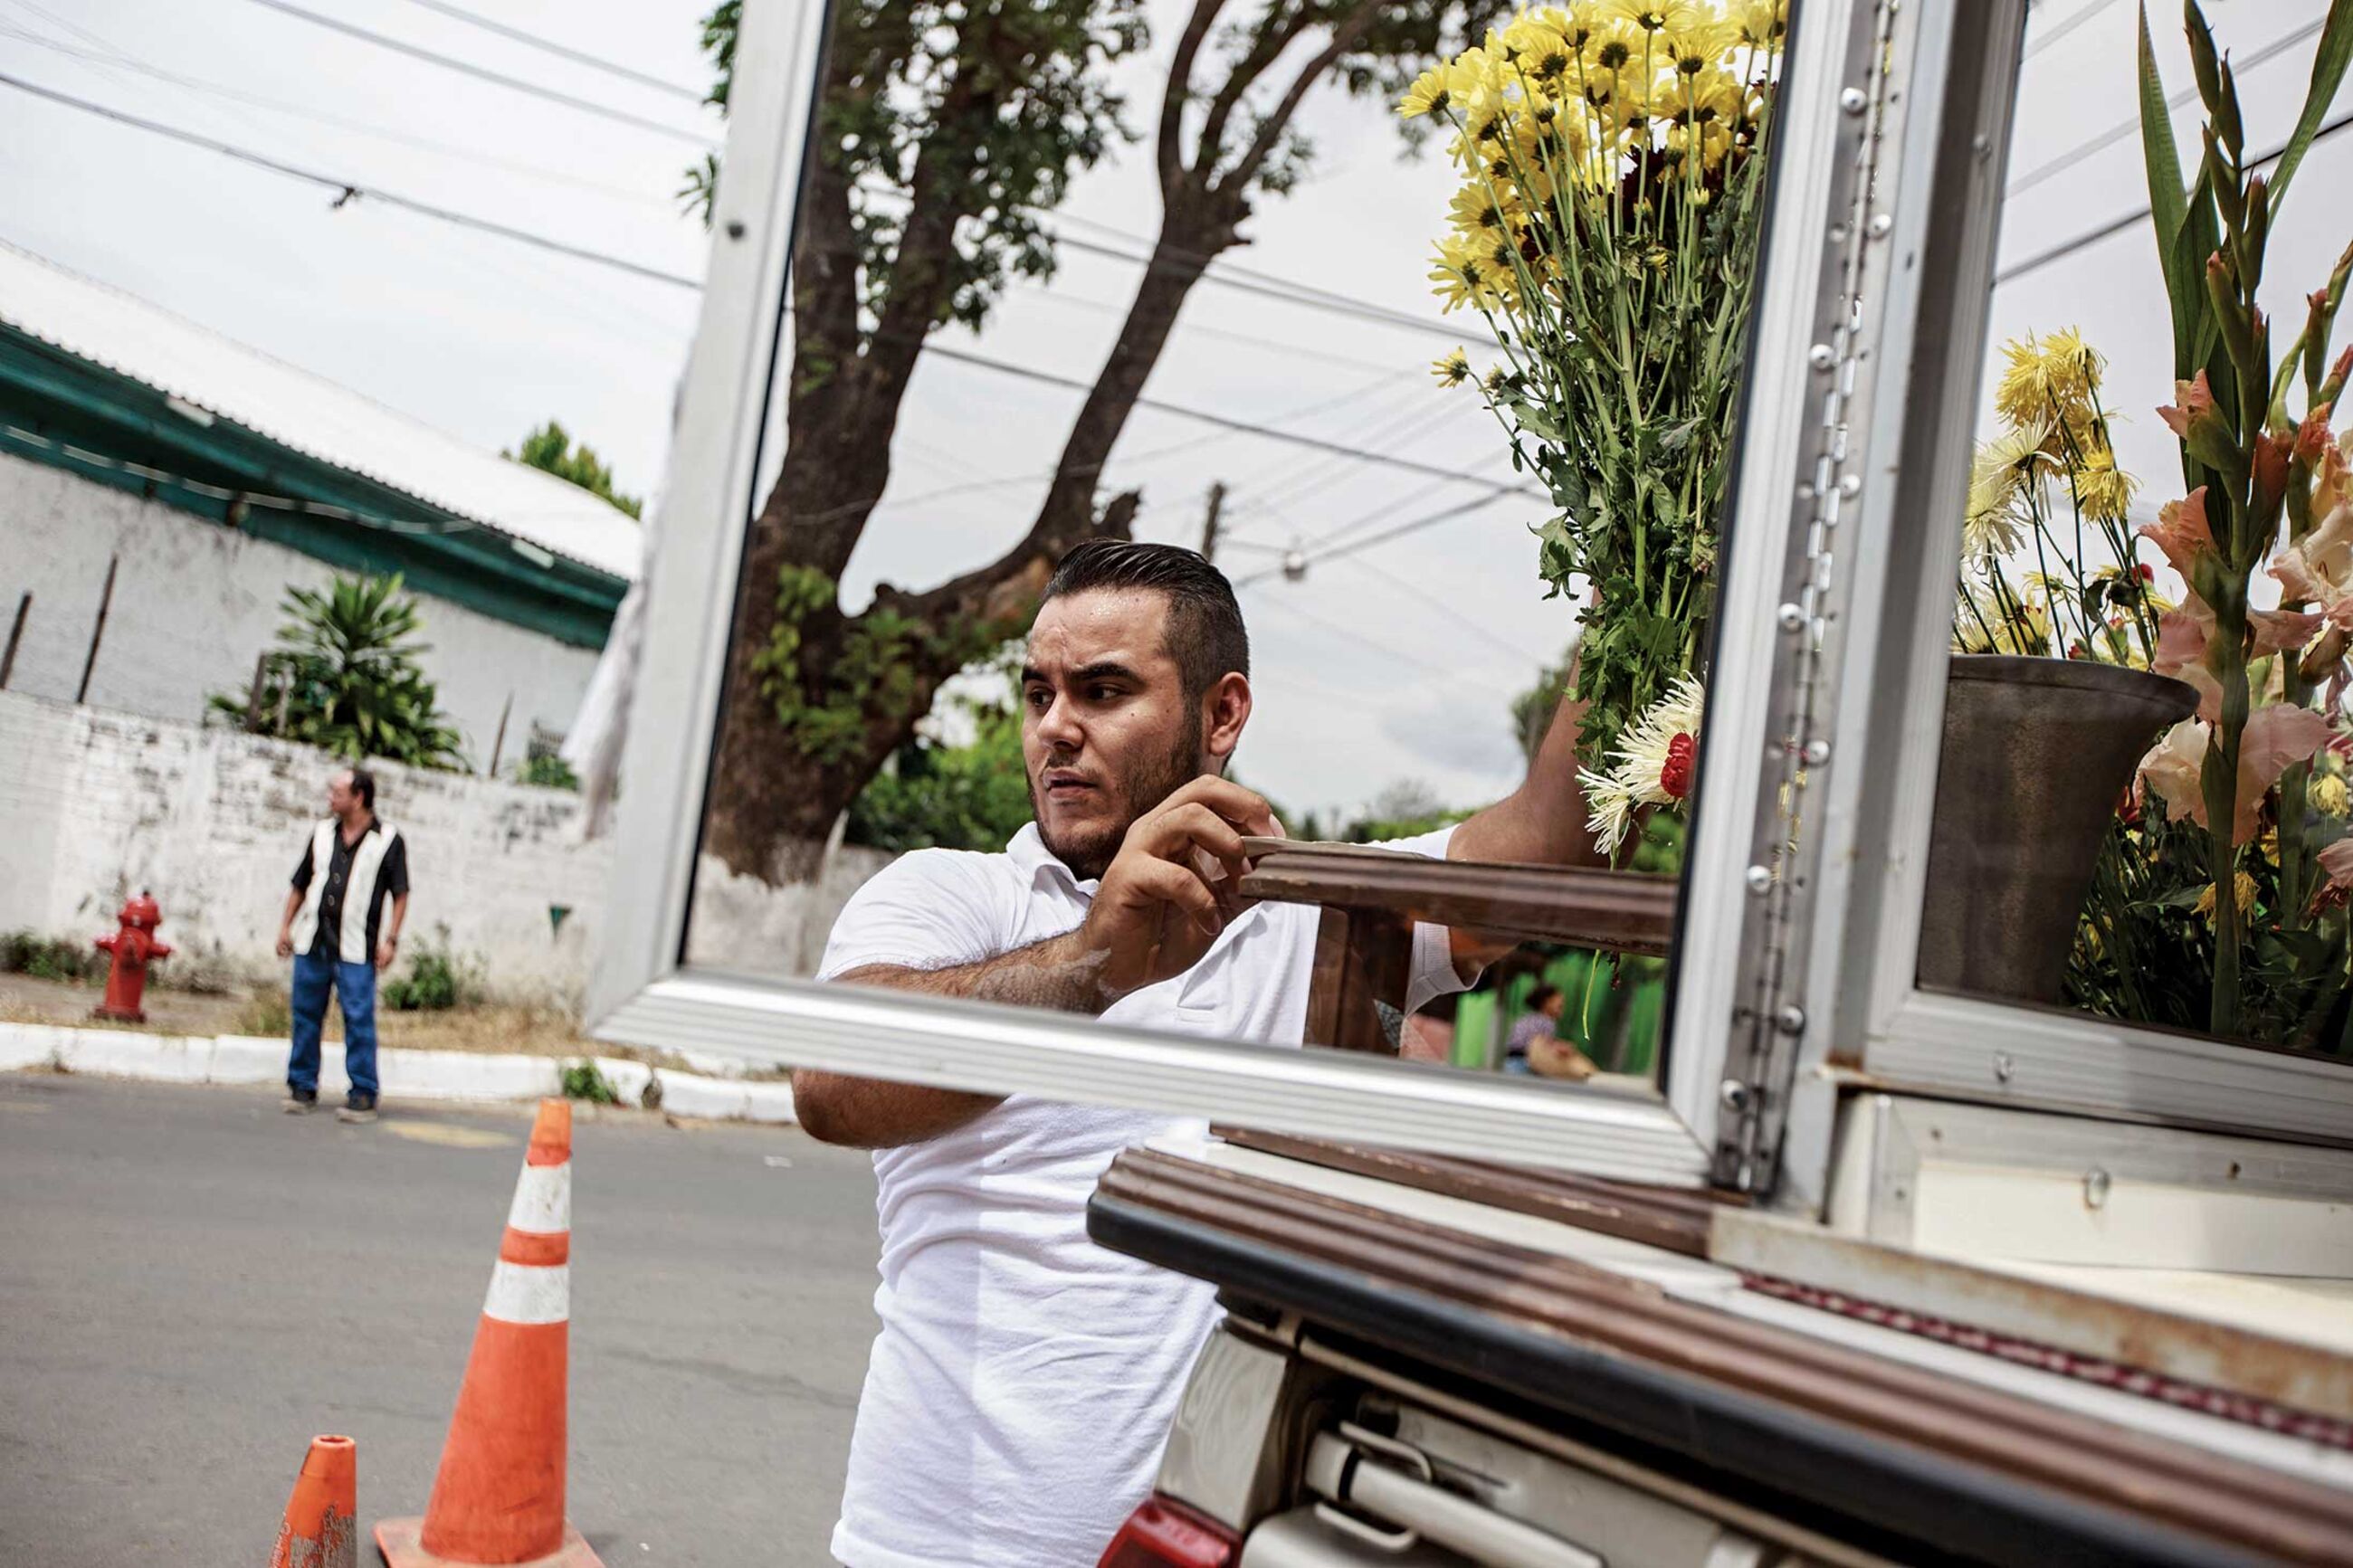 relates to The Coffin Business Is Booming in Central America Due to Gang Violence